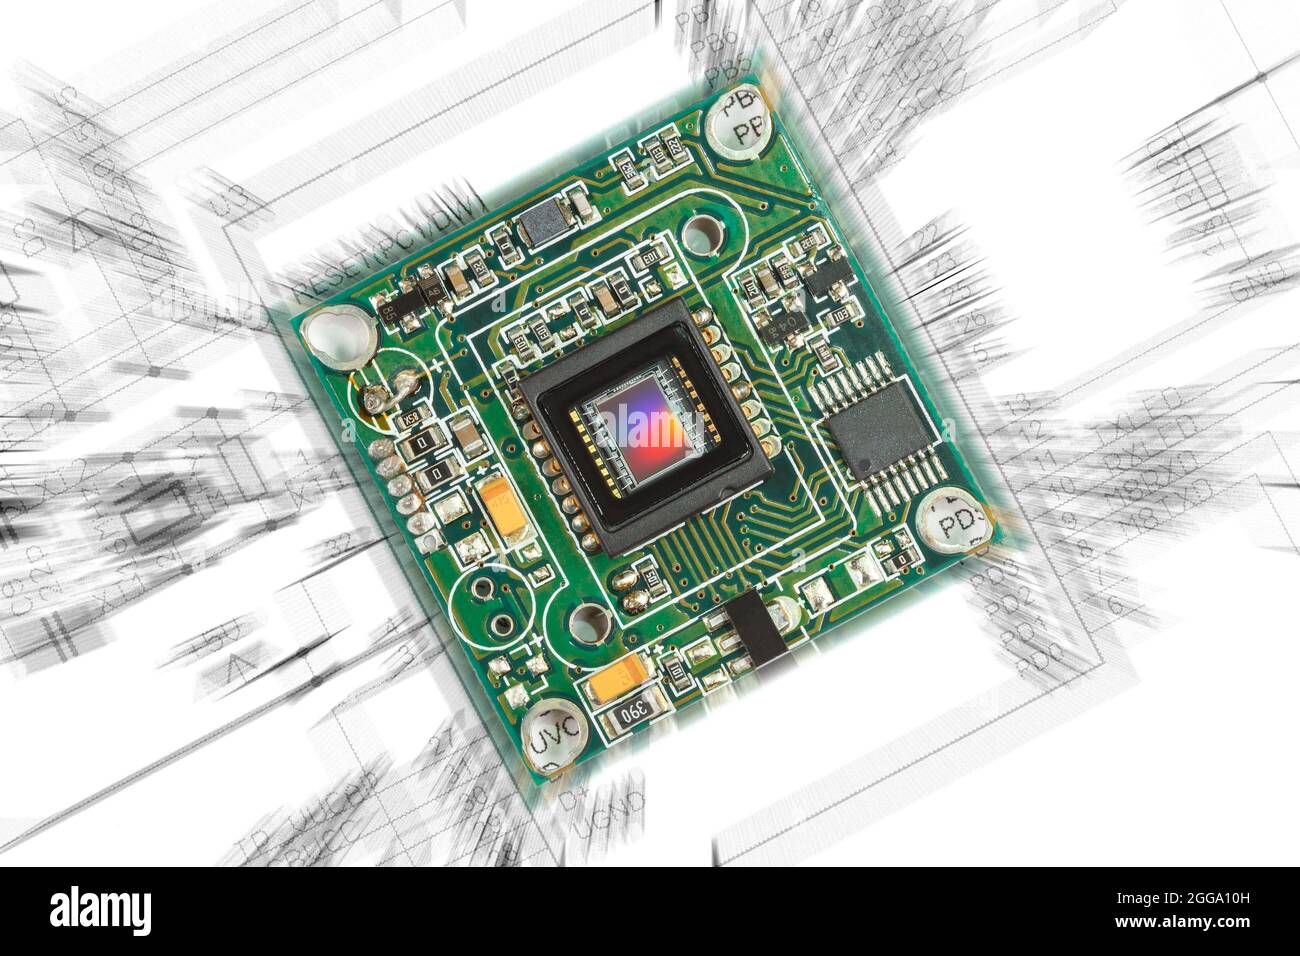 Collage of a printed circuit board with a CMOS sensor against the background of an electrical circuit with a radial blur effect Stock Photo